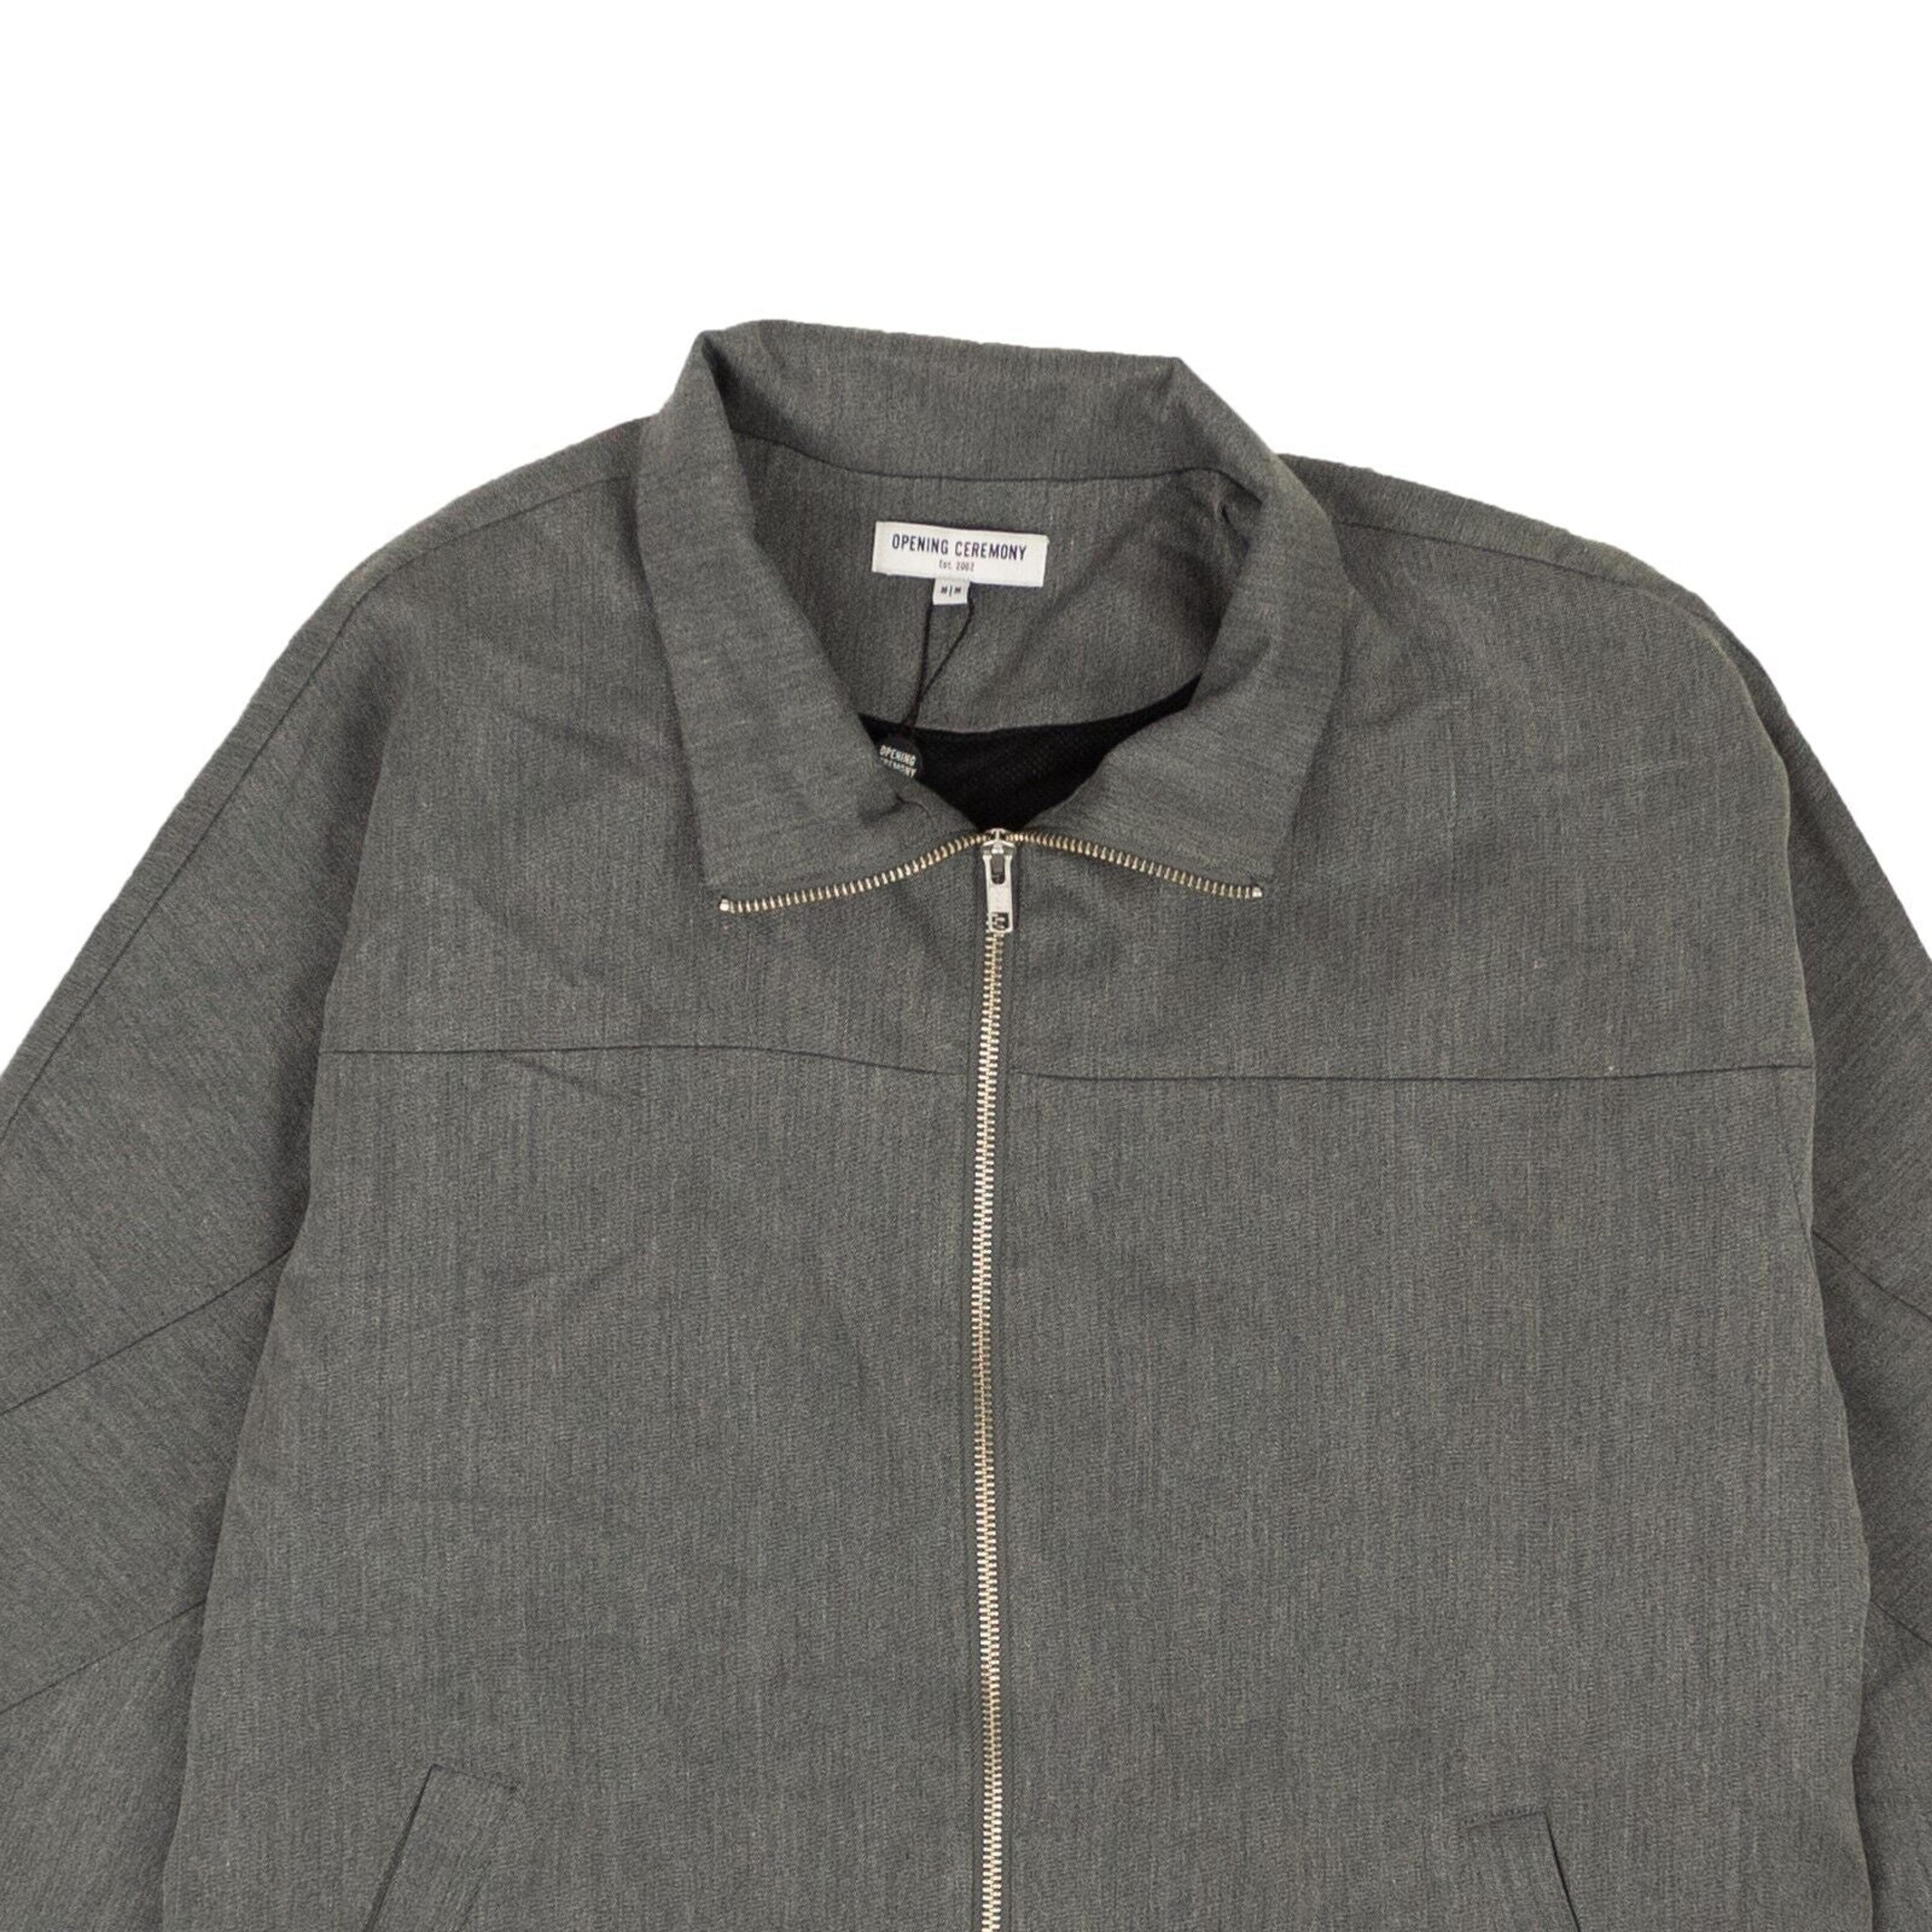 Alternate View 1 of Opening Ceremony Tailoring Warm-Up Jacket - Grey